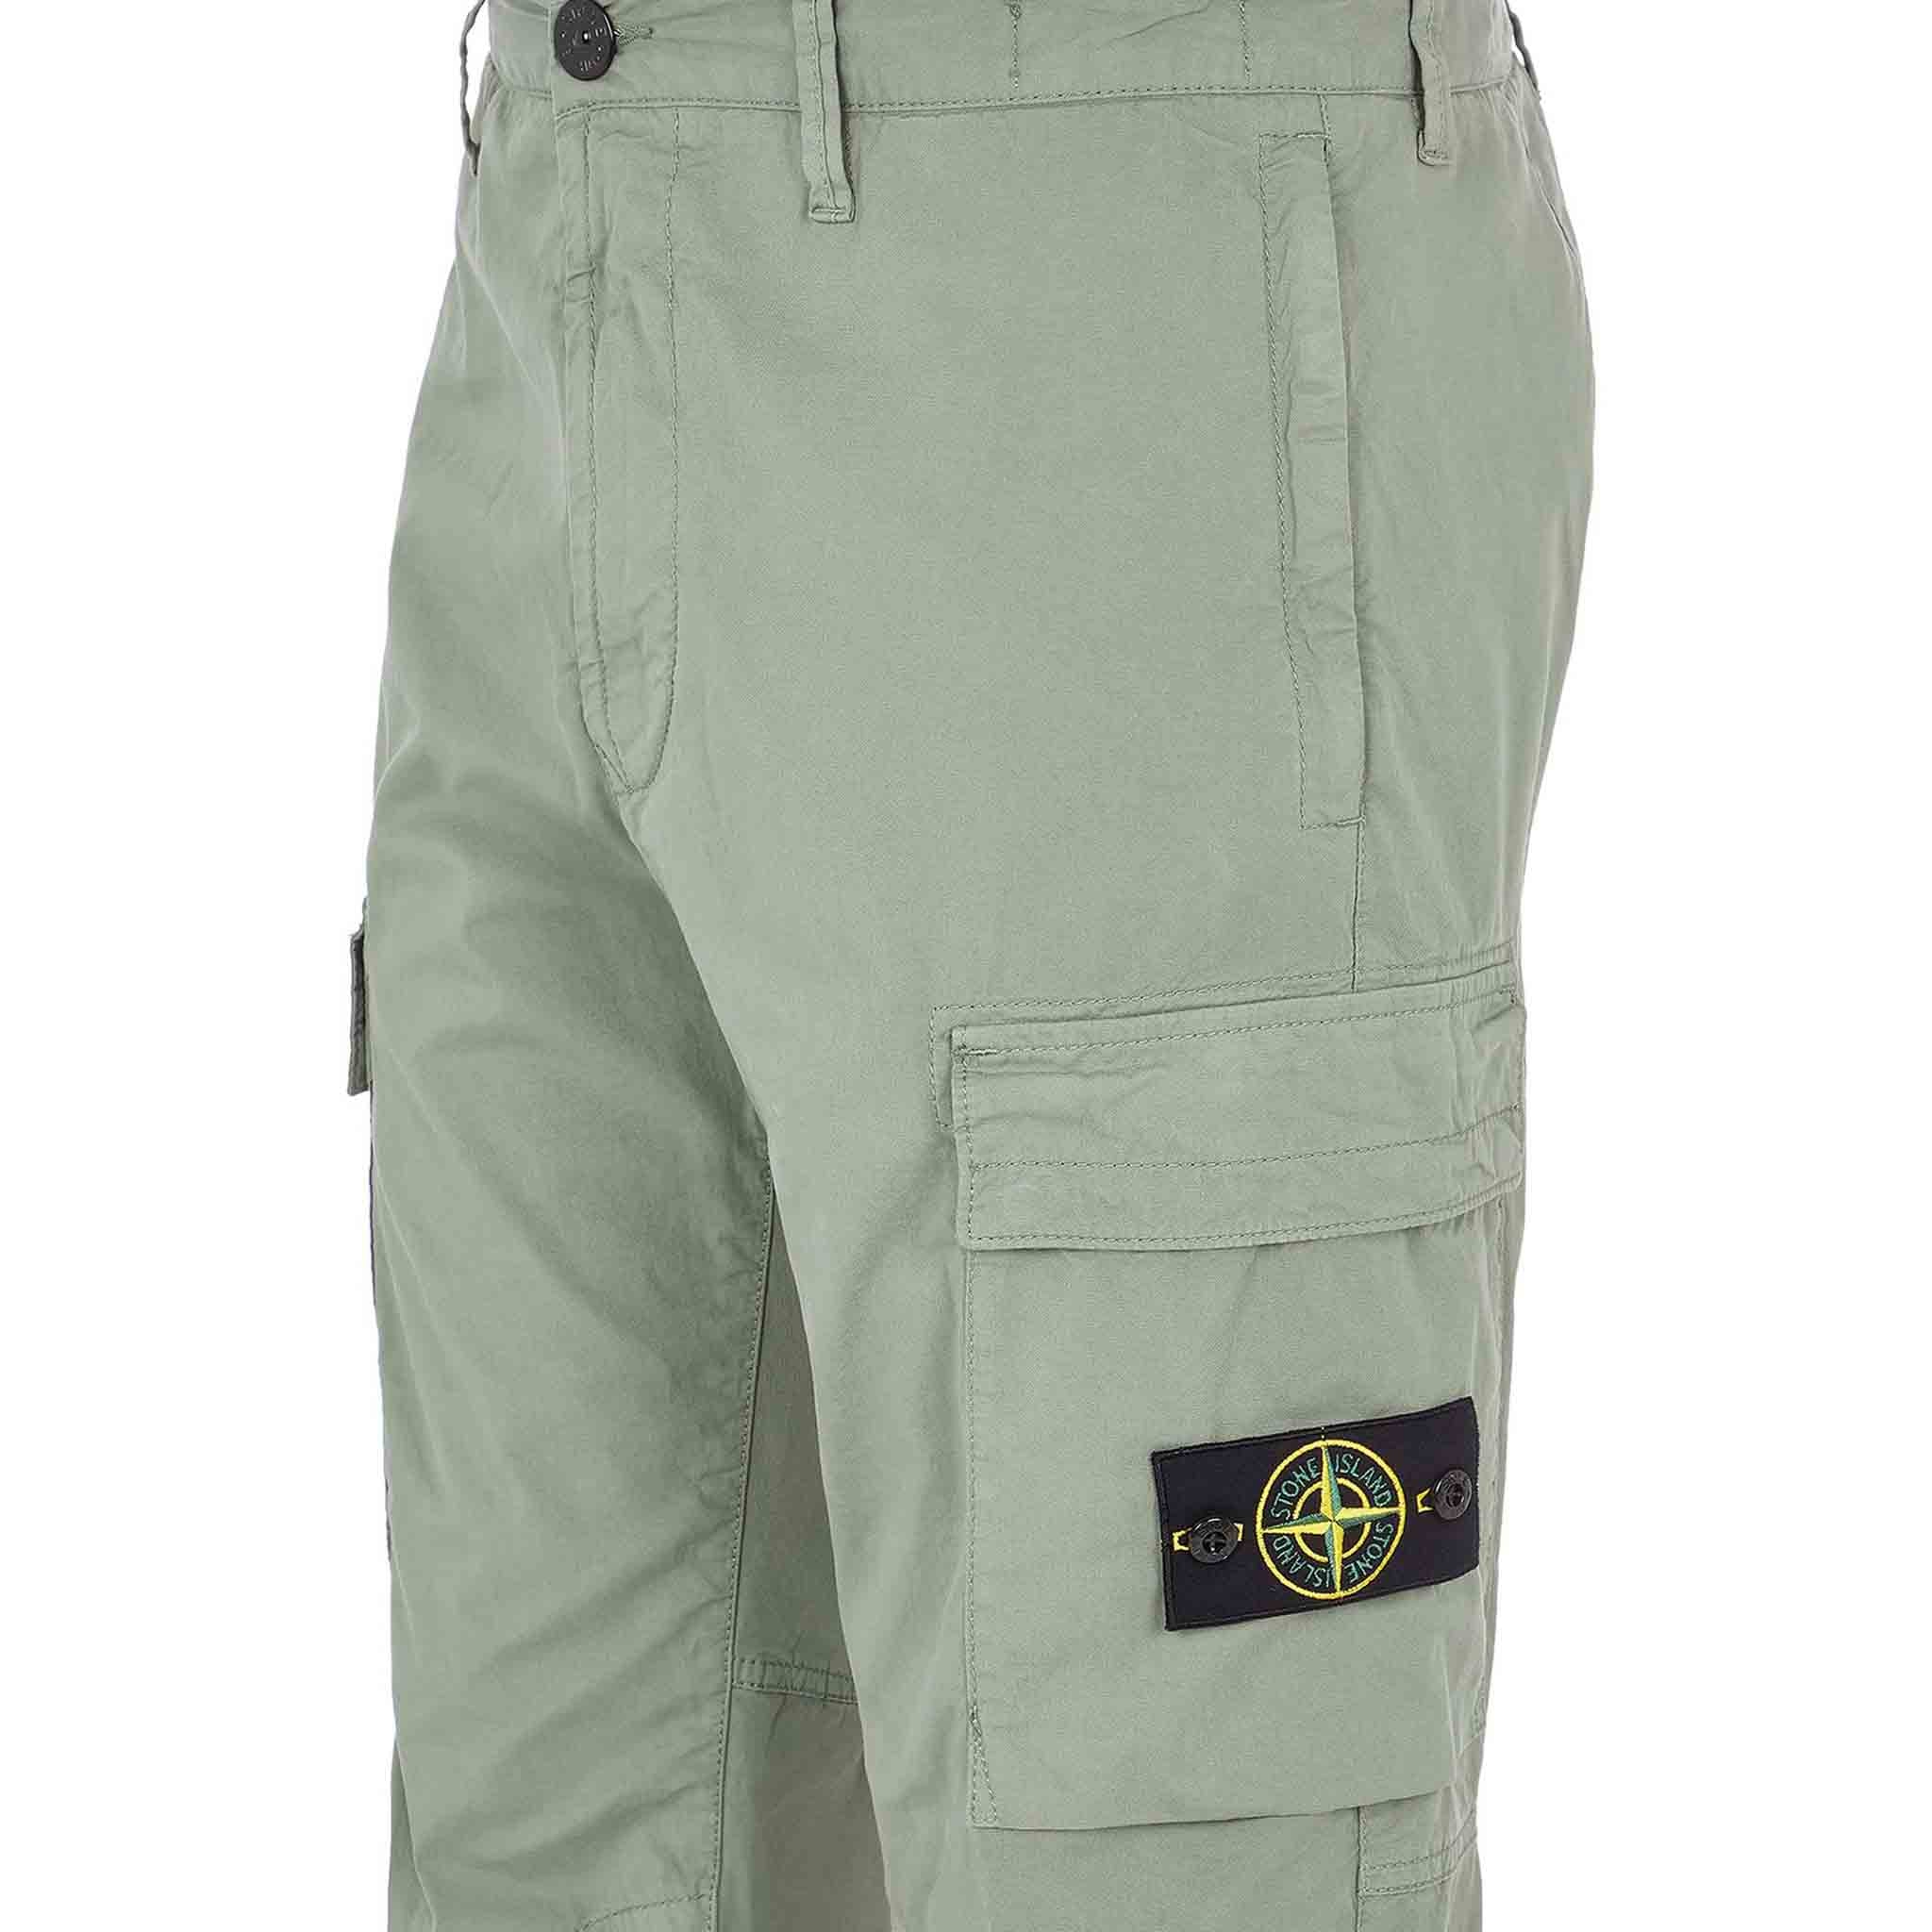 Stone Island Garment Dyed "Old" Treatment Cuffed Cargo Pants in Sage Green